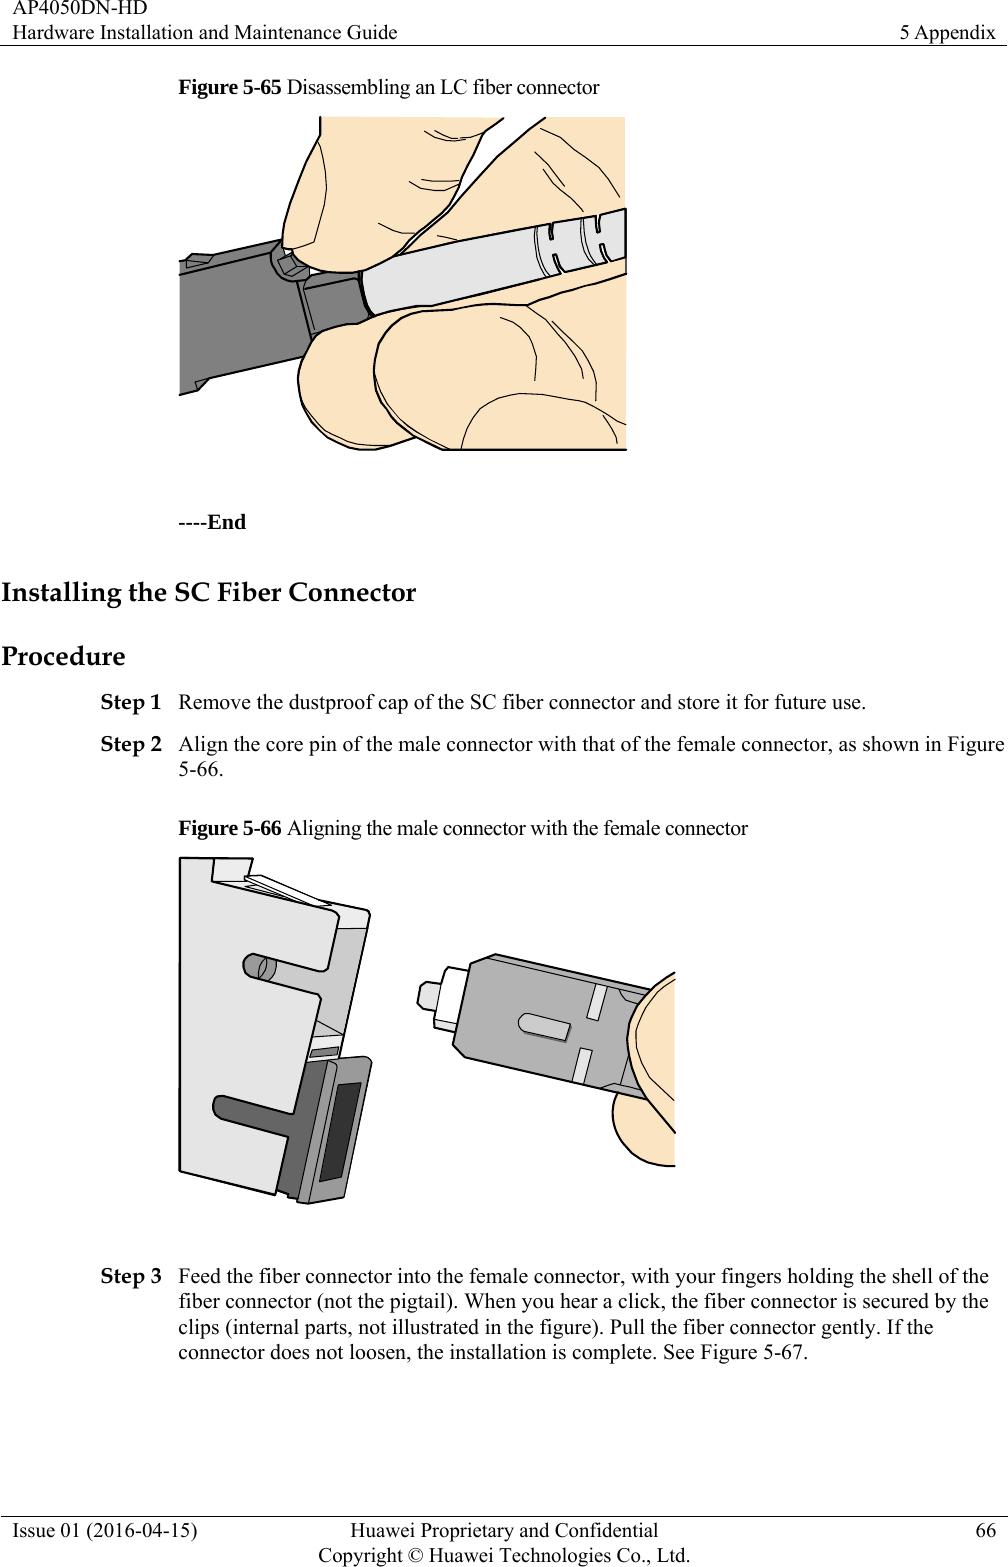 AP4050DN-HD Hardware Installation and Maintenance Guide  5 Appendix Issue 01 (2016-04-15)  Huawei Proprietary and Confidential         Copyright © Huawei Technologies Co., Ltd.66 Figure 5-65 Disassembling an LC fiber connector   ----End Installing the SC Fiber Connector Procedure Step 1 Remove the dustproof cap of the SC fiber connector and store it for future use. Step 2 Align the core pin of the male connector with that of the female connector, as shown in Figure 5-66. Figure 5-66 Aligning the male connector with the female connector   Step 3 Feed the fiber connector into the female connector, with your fingers holding the shell of the fiber connector (not the pigtail). When you hear a click, the fiber connector is secured by the clips (internal parts, not illustrated in the figure). Pull the fiber connector gently. If the connector does not loosen, the installation is complete. See Figure 5-67. 